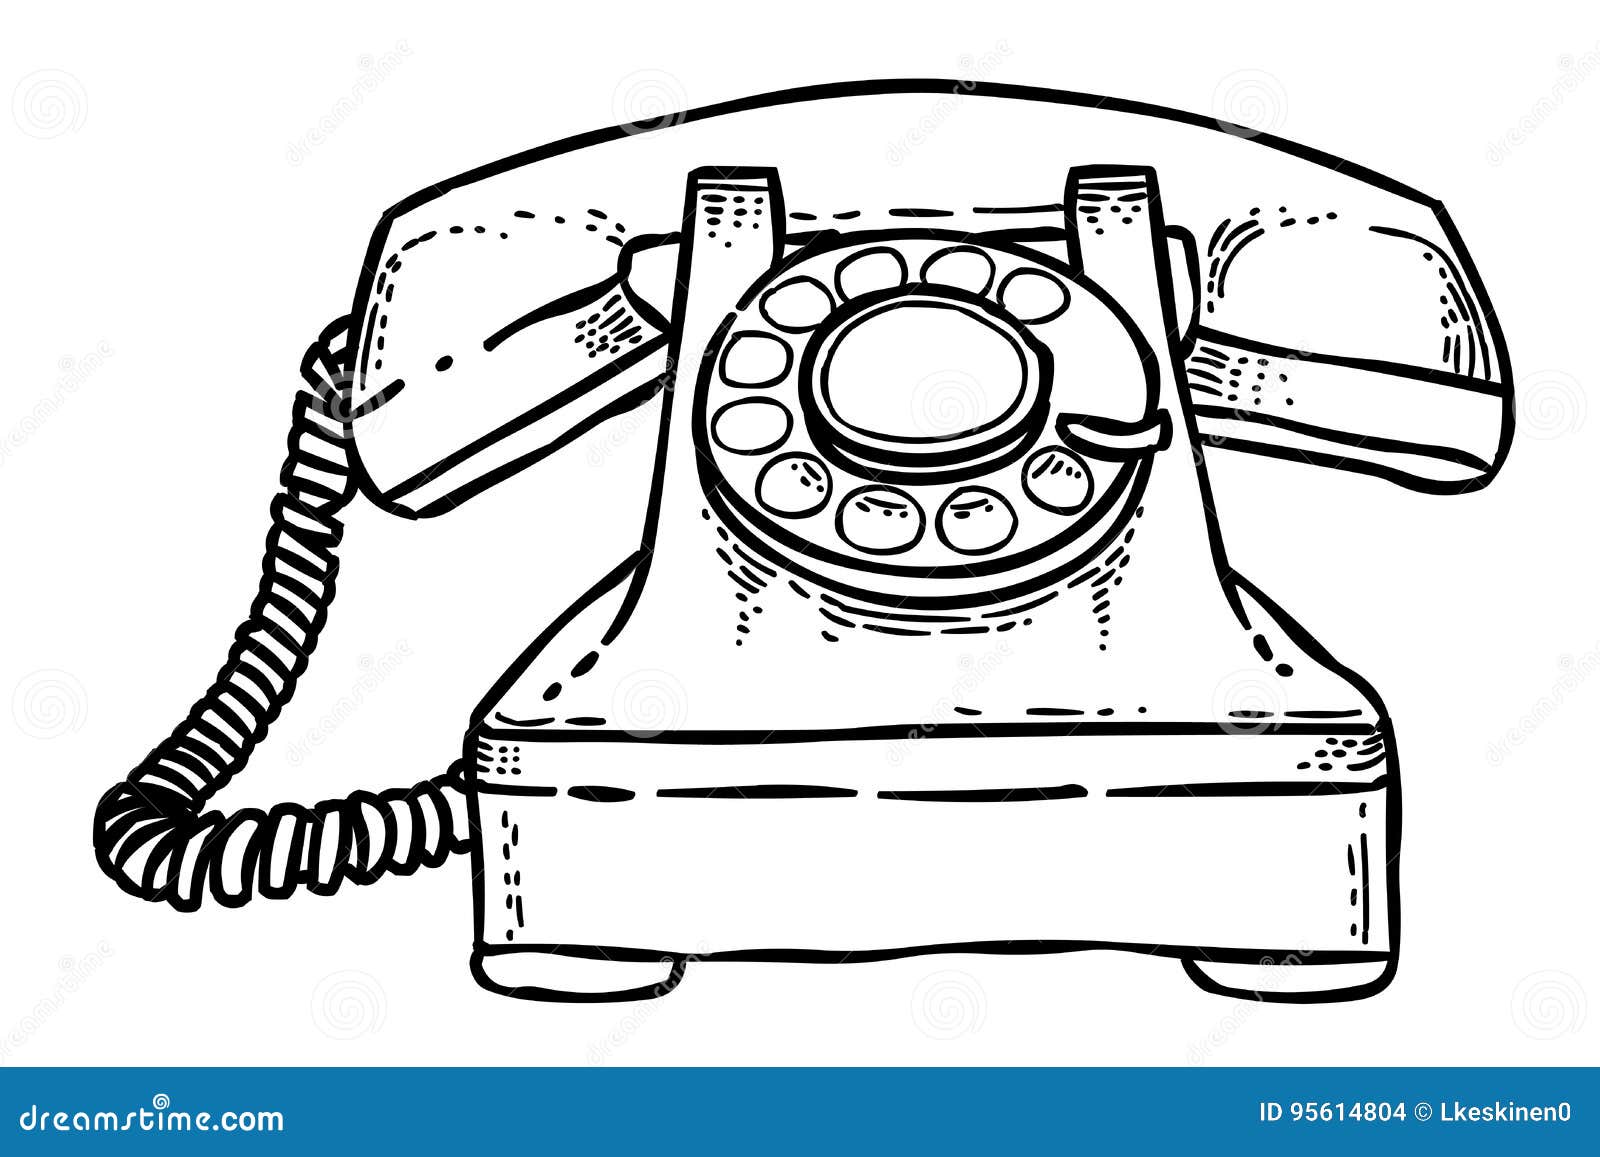 9,456 Old Telephone Drawing Images, Stock Photos & Vectors | Shutterstock